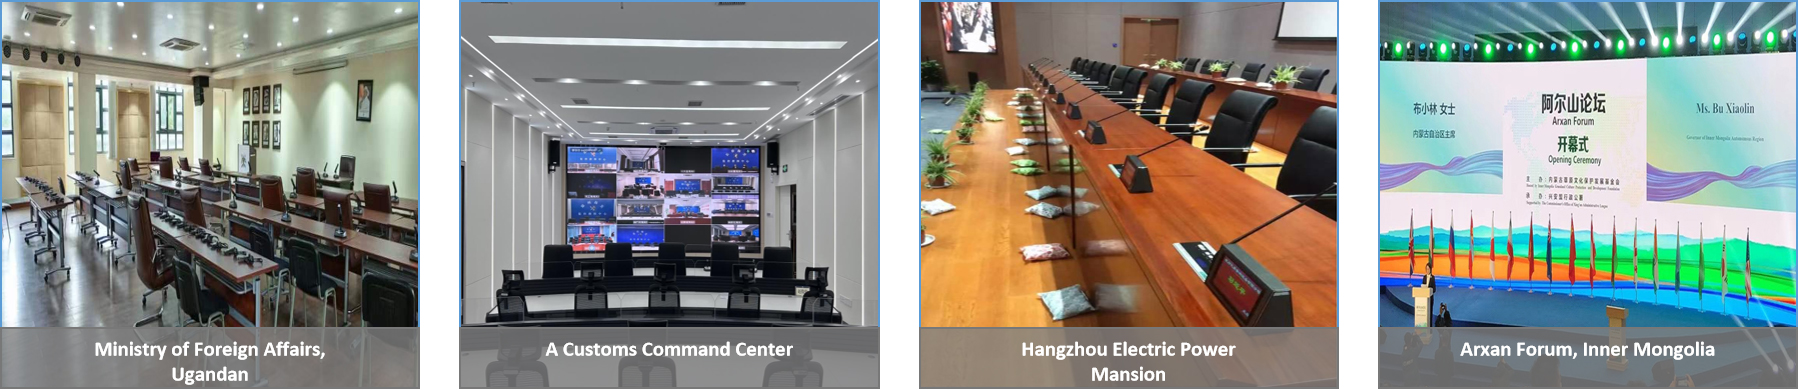 ip-audio-conference-system-solution-for-medium-sized-conference-rooms-18.jpg